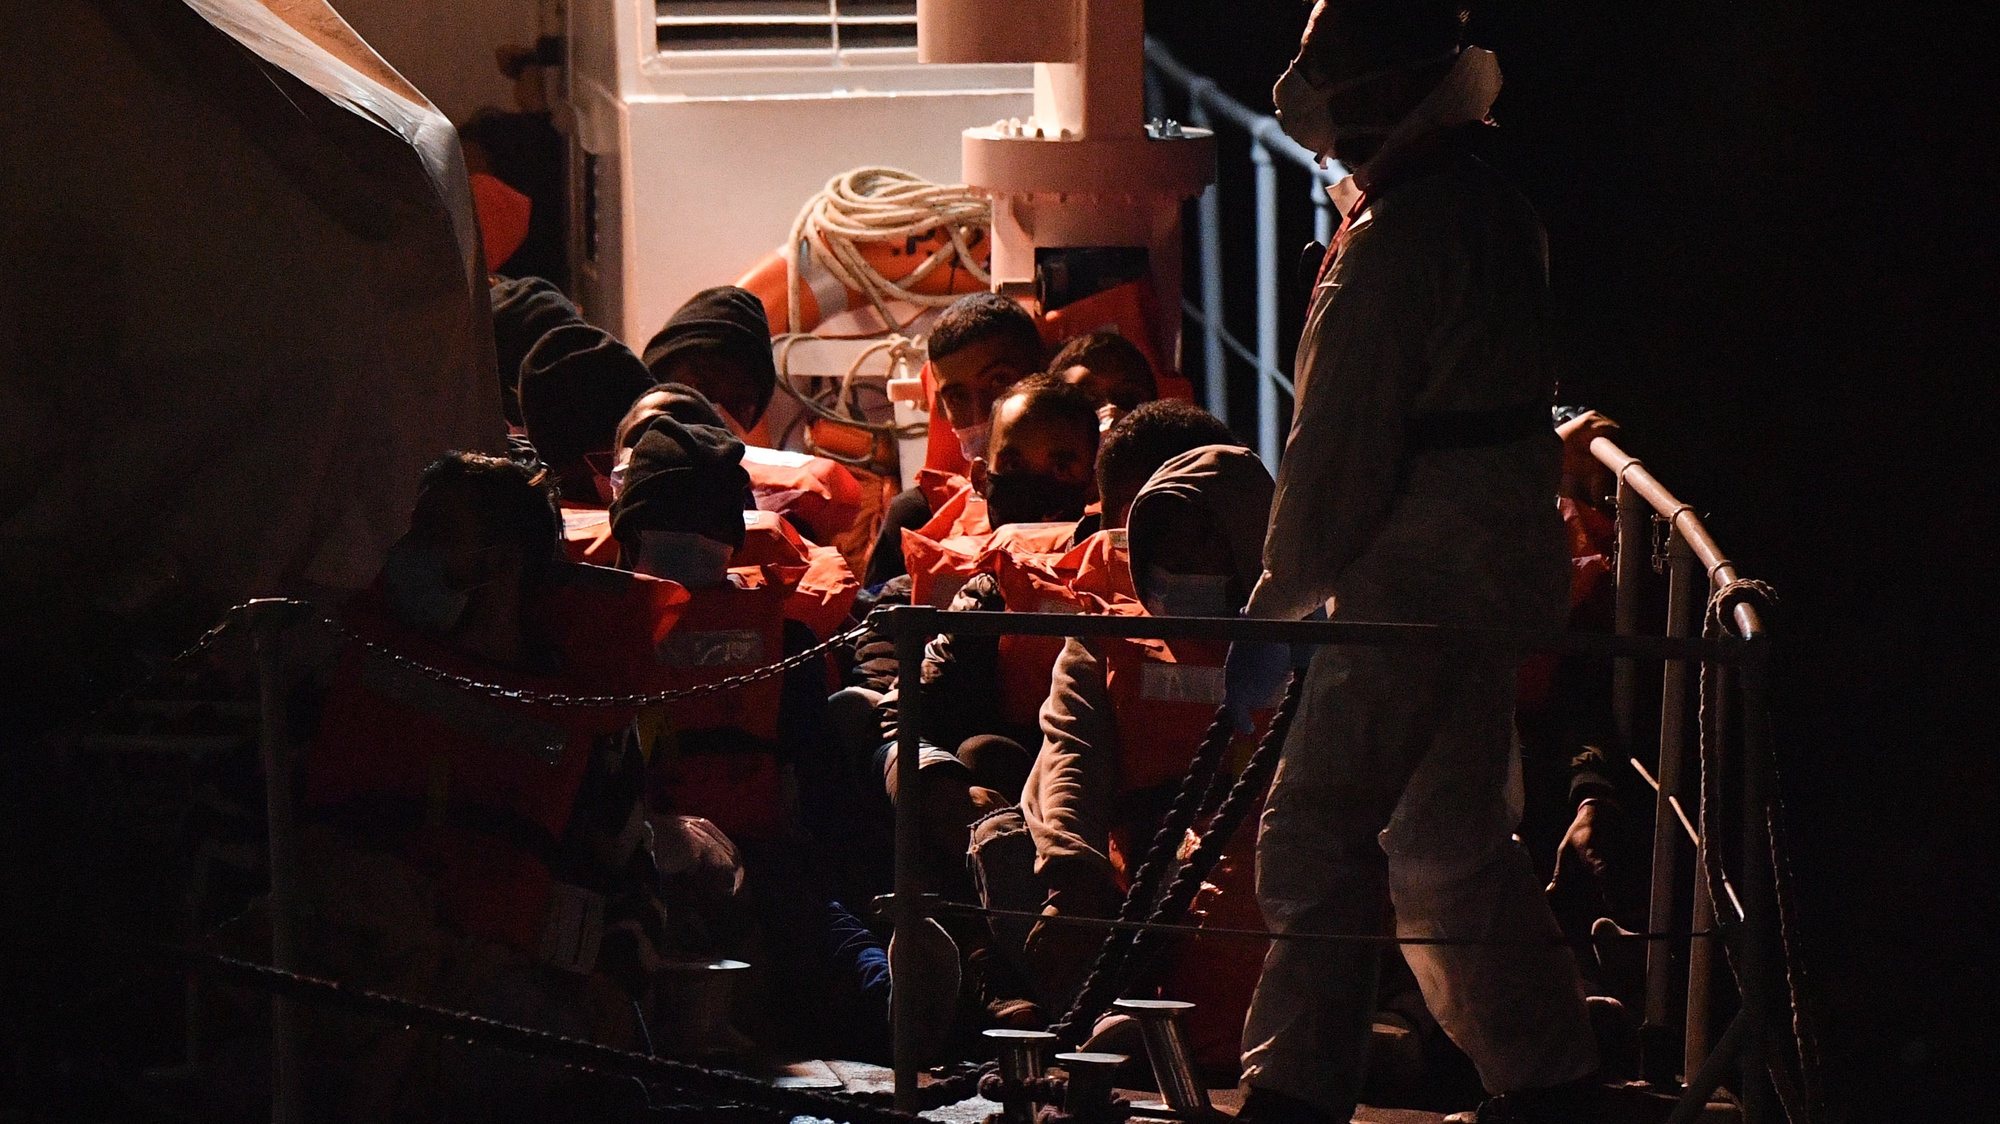 epa09592342 Migrants onboard the Geo Barents ship managed by the NGO Doctors Without Borders prepare to disembark in the harbor of Messina, Sicily, Italy, 19 November 2021. A total of 186 migrants were rescued in the Mediterranean Sea. Ten bodies were also recovered.  EPA/CARMELO IMBESI